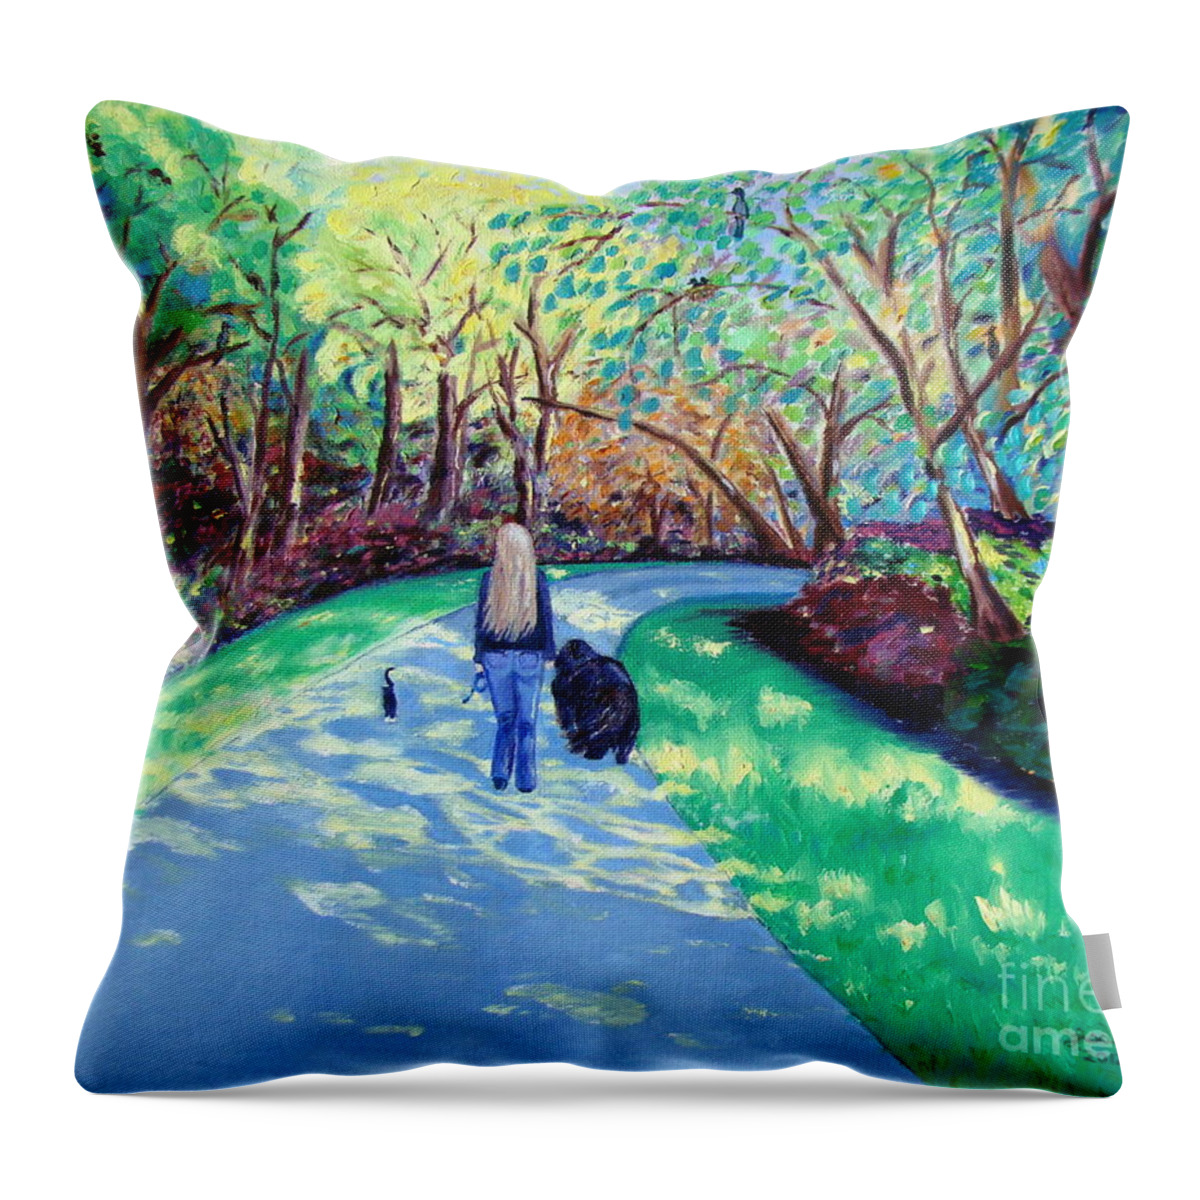 Take A Walk Throw Pillow featuring the painting Our Daily Walk by Lisa Rose Musselwhite